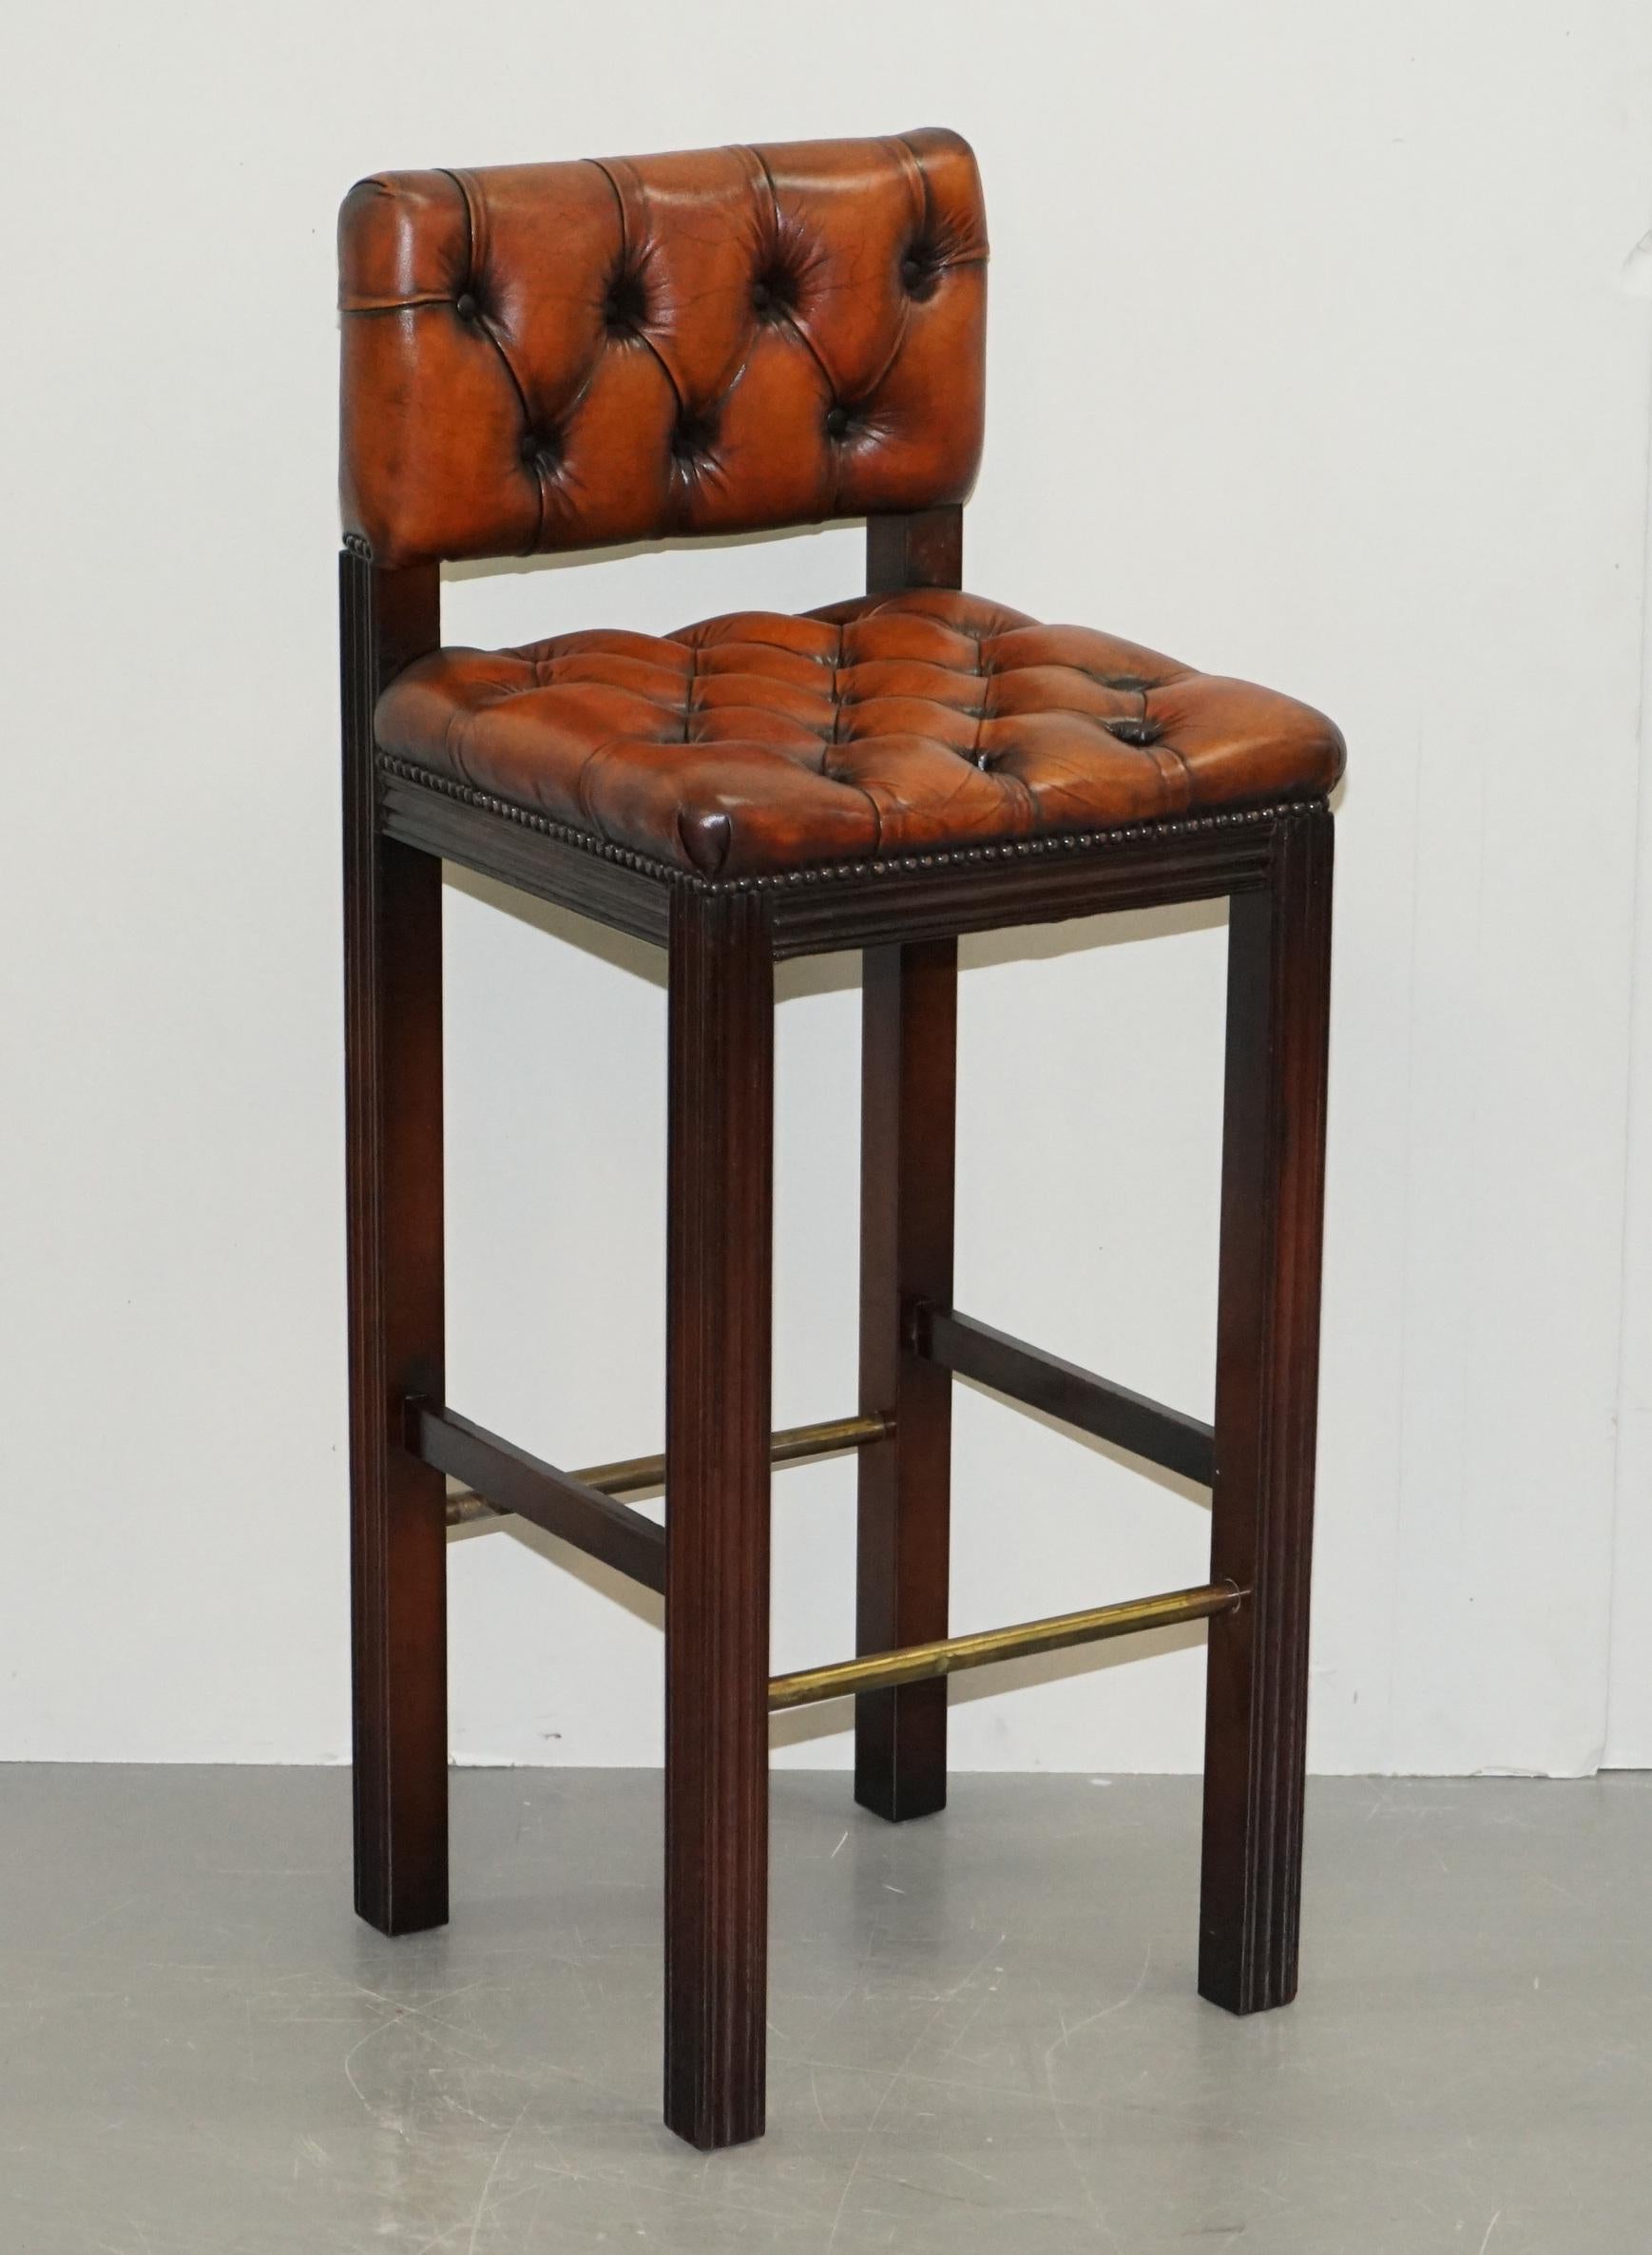 We are delighted to offer this sublime pair of Harrods London fully restored whisky brown leather Chesterfield button bar stools

A very rare vintage suite of five Harrods bar stools, these are approximately 40-50 years old, they were made by